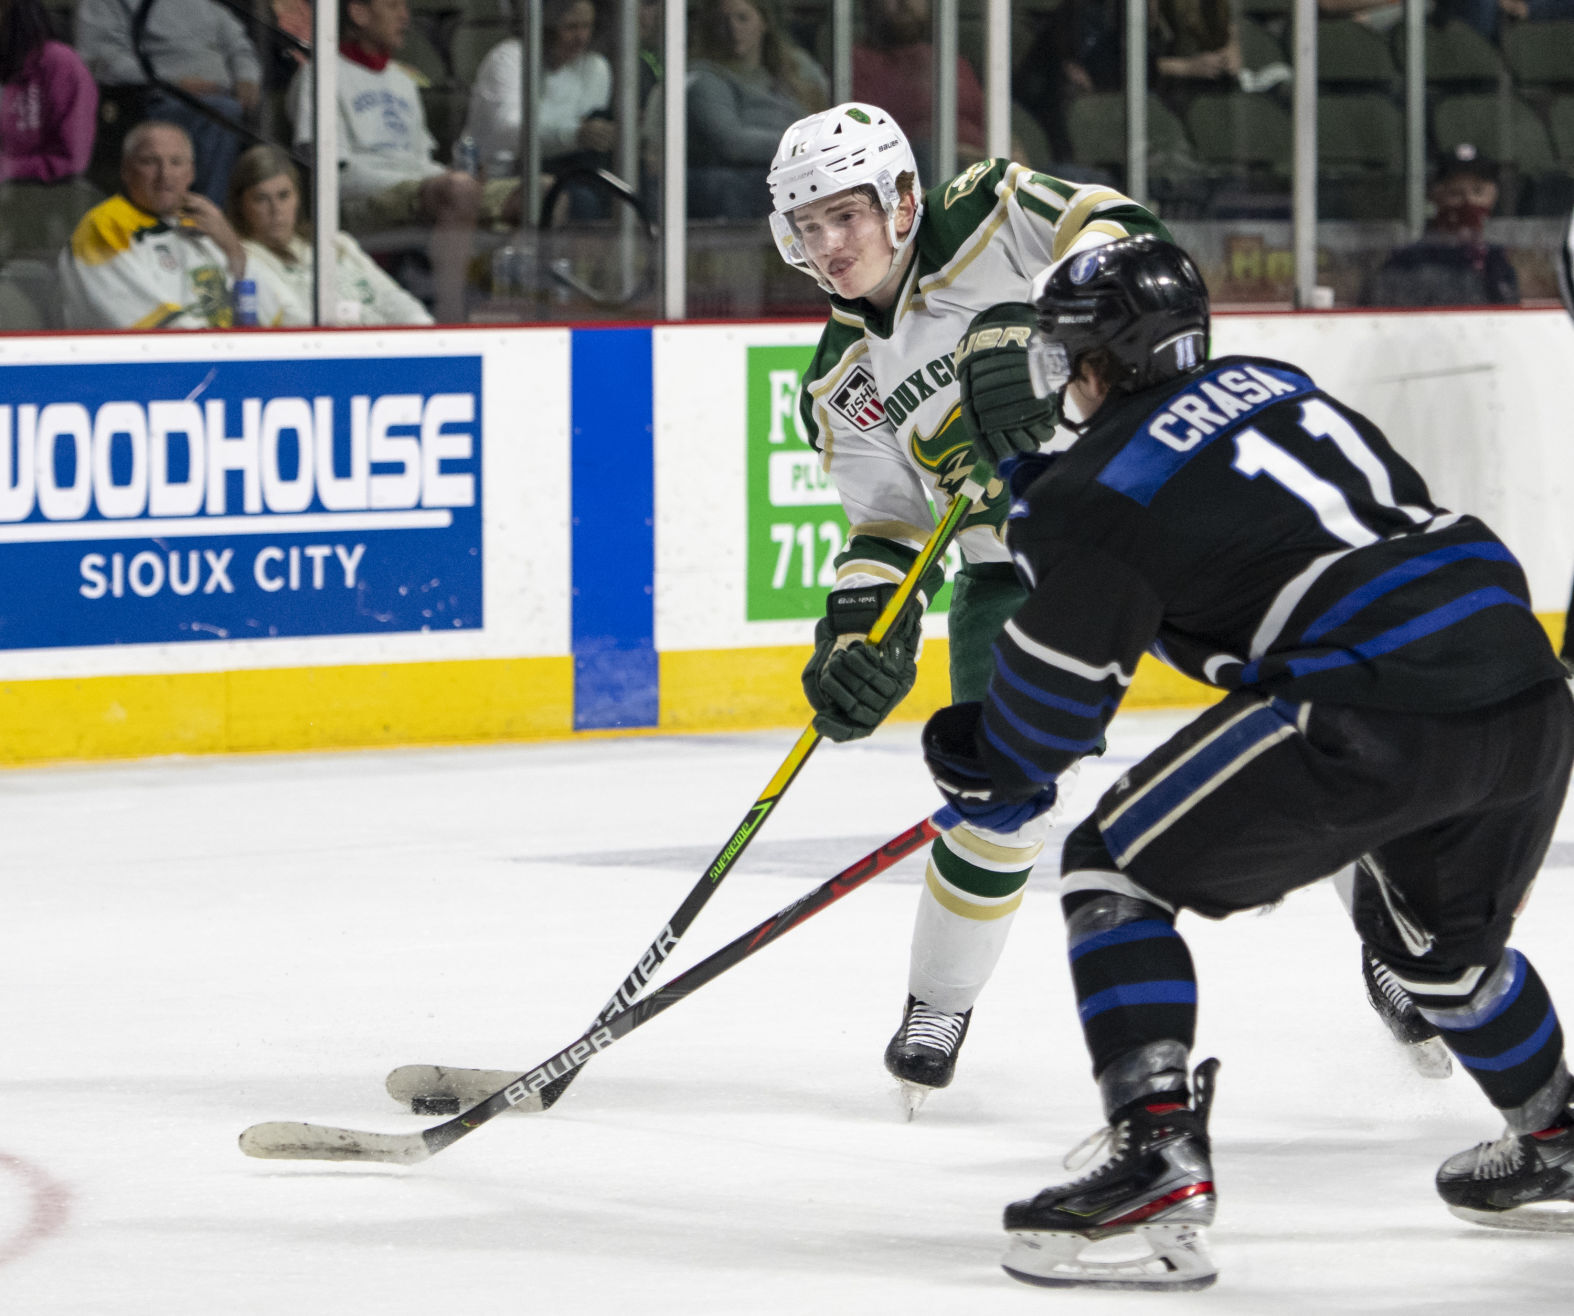 Sioux City Musketeers win late against Tri-City Storm in stunning Western Conference Final opener